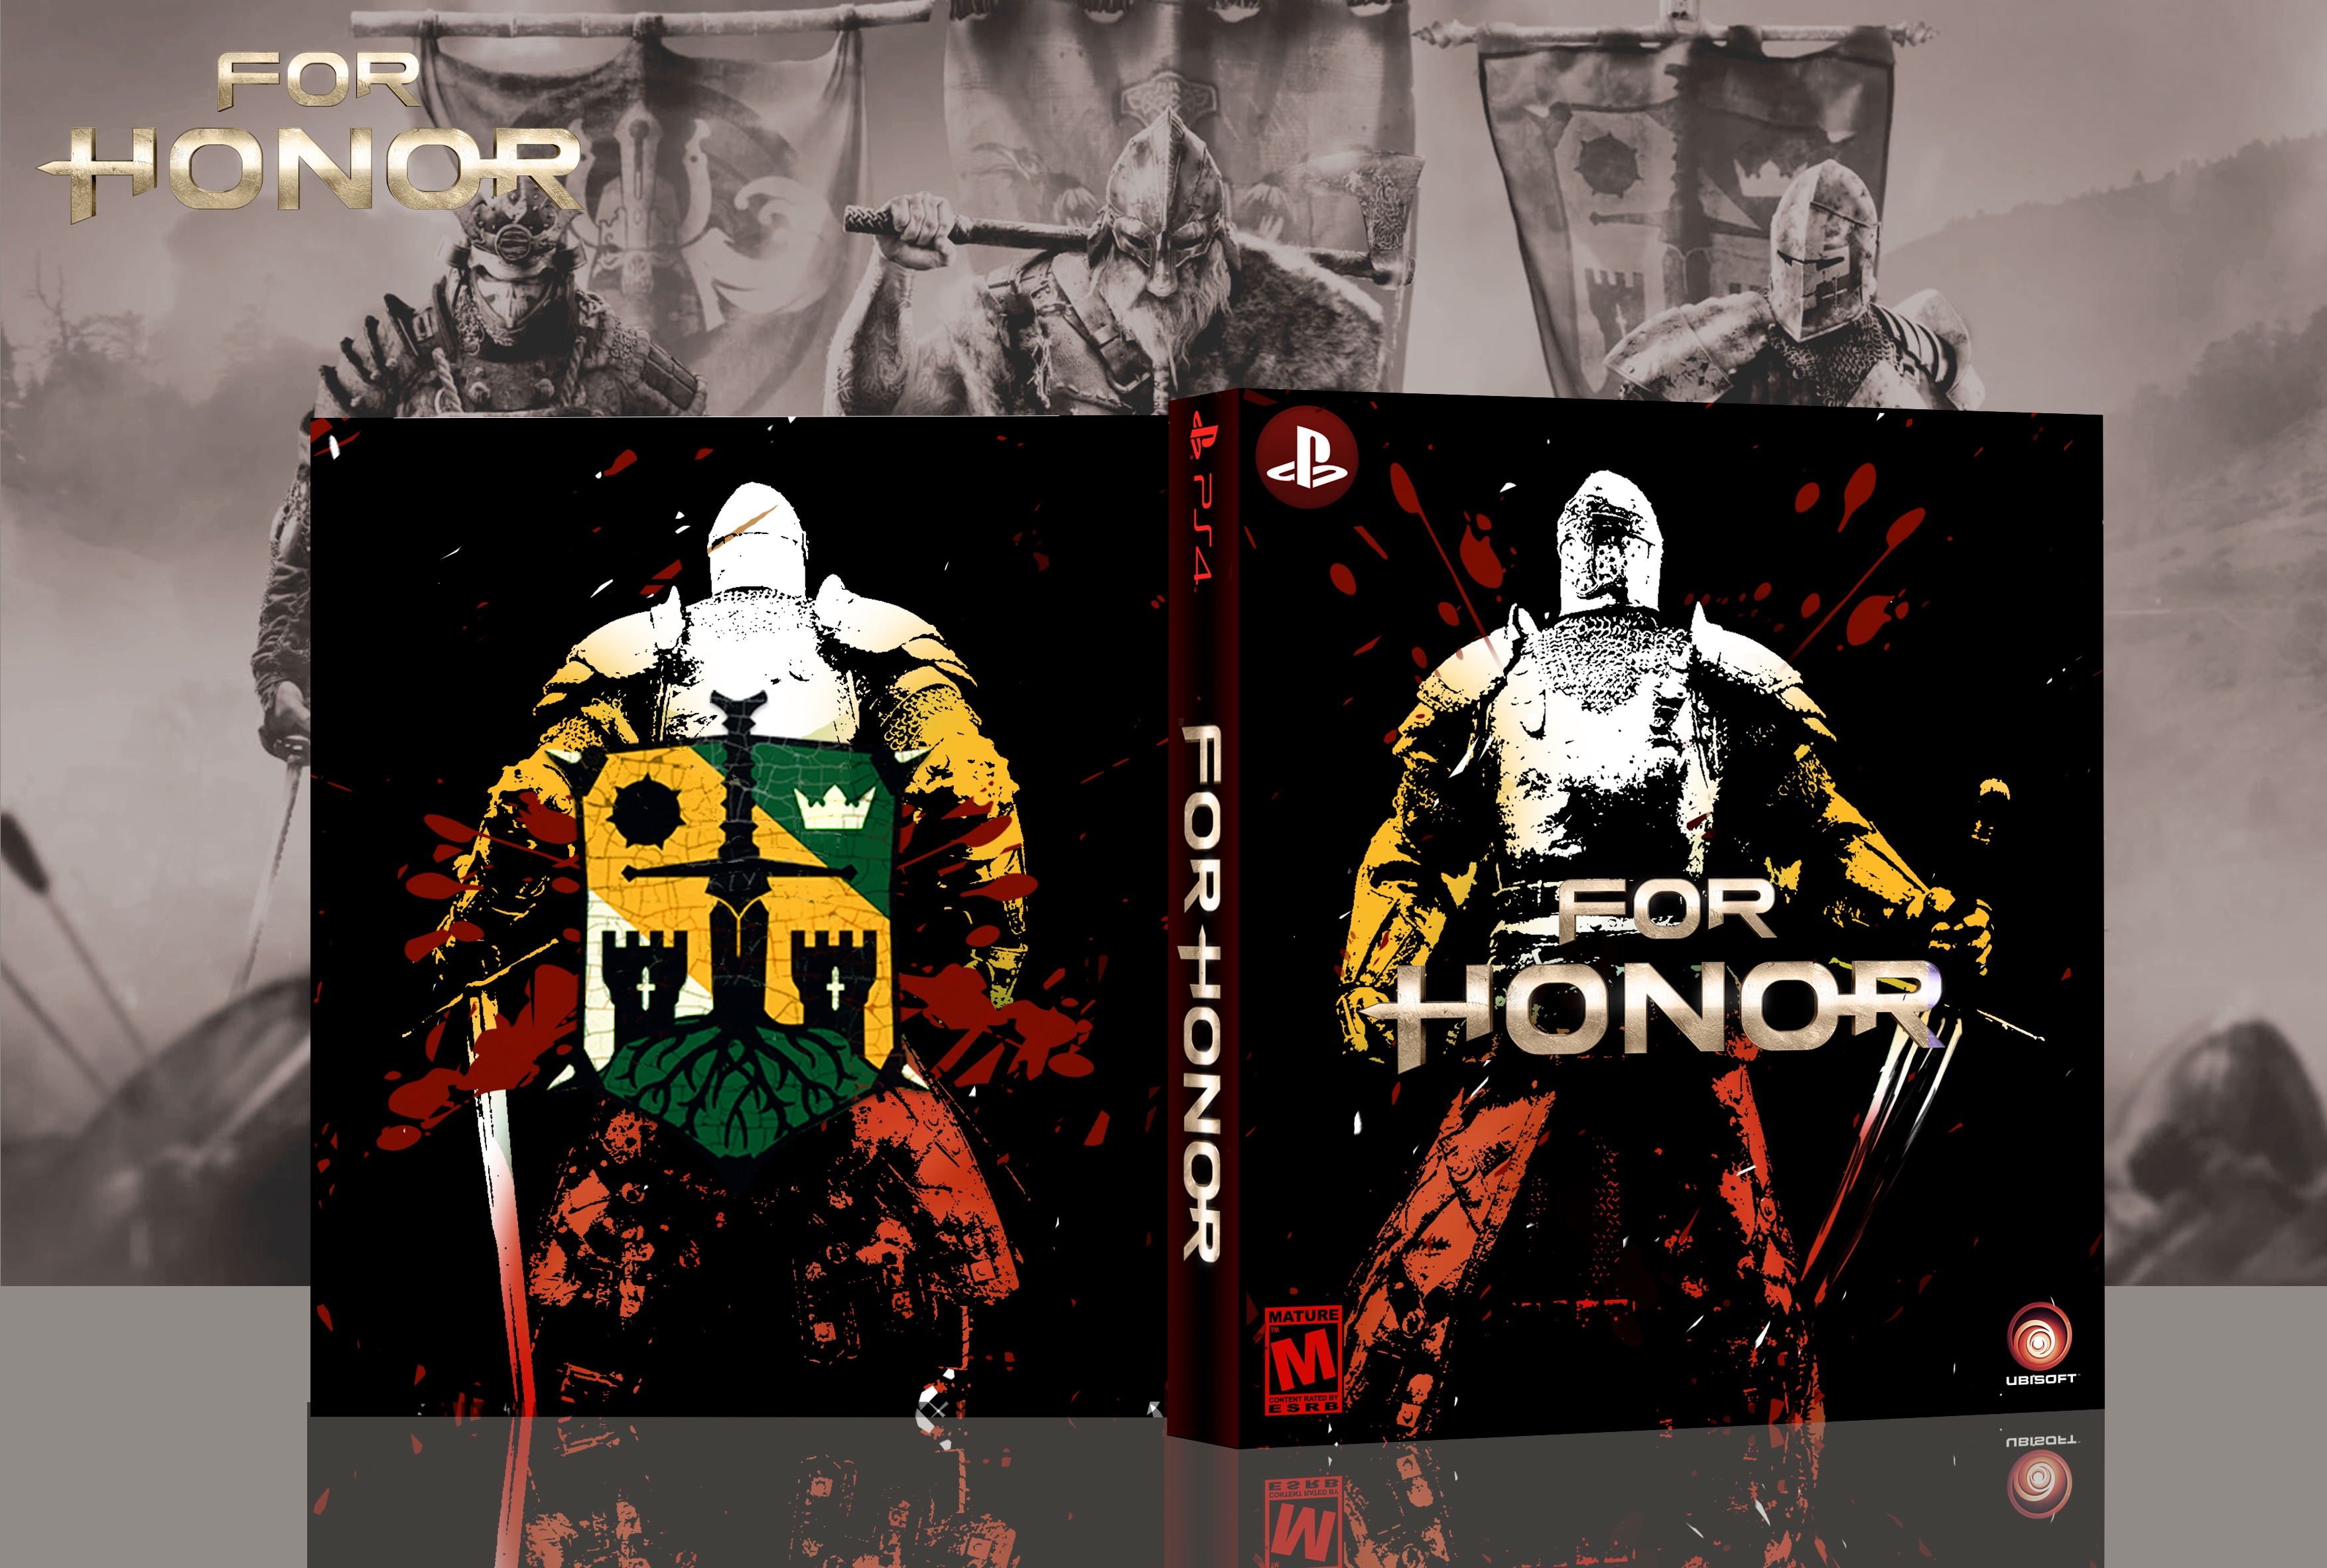 For Honor knights box cover